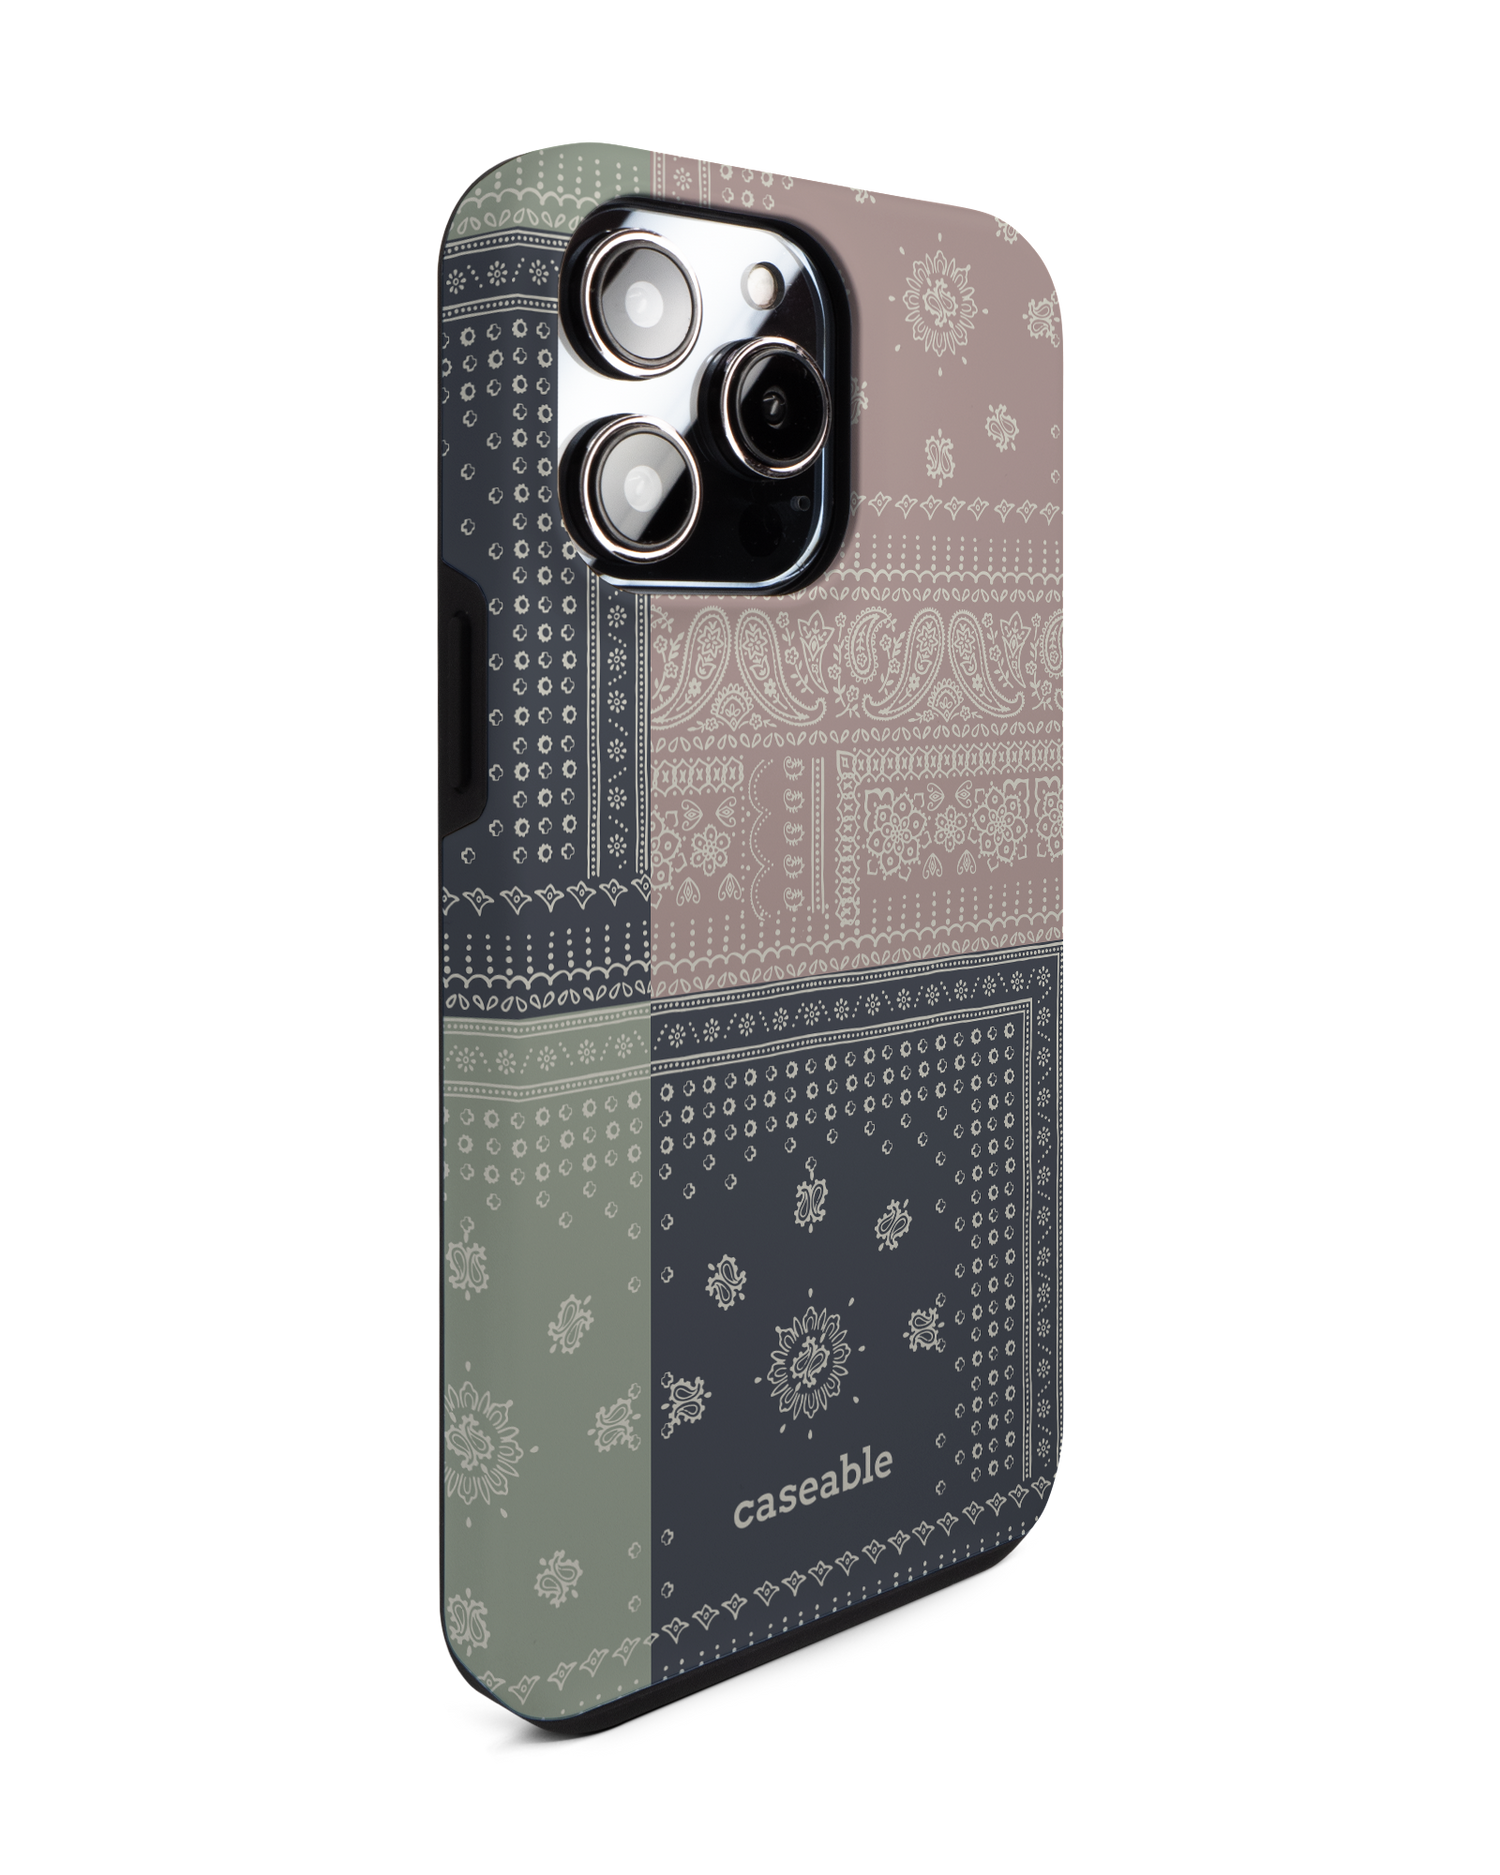 Bandana Patchwork Premium Phone Case for Apple iPhone 14 Pro Max: View from the left side